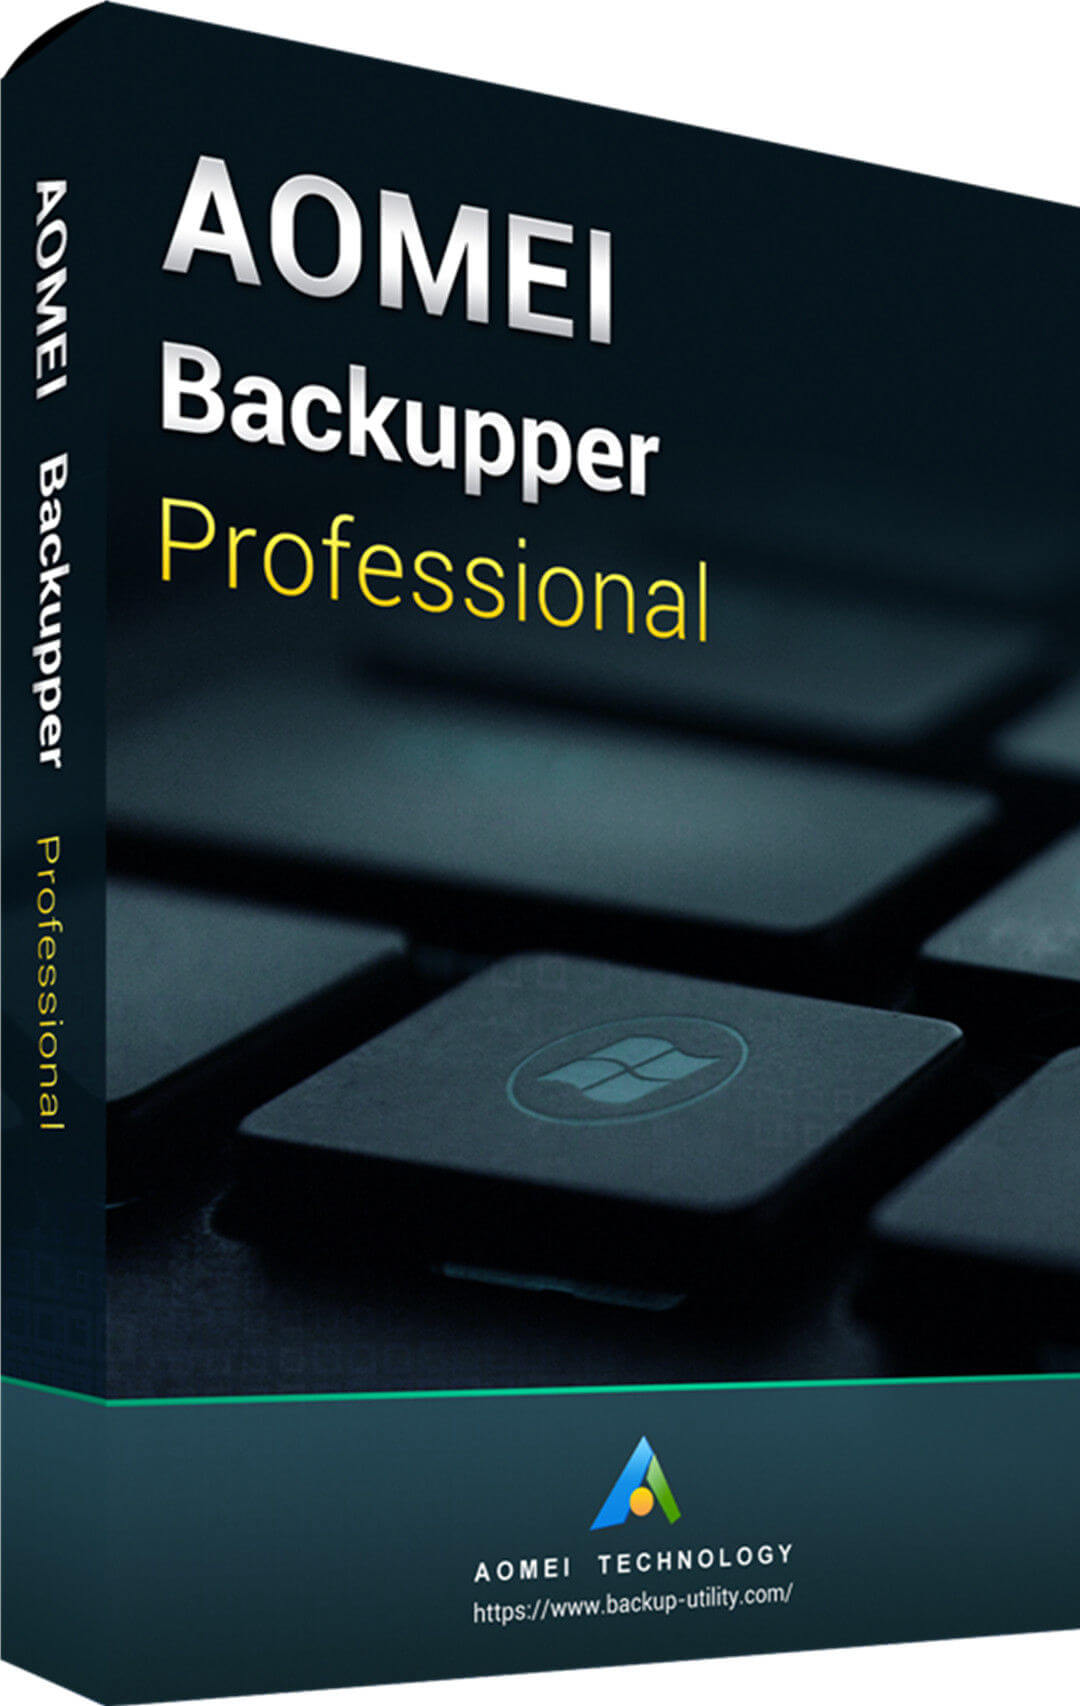 download the new version for windows AOMEI Backupper Professional 7.3.0